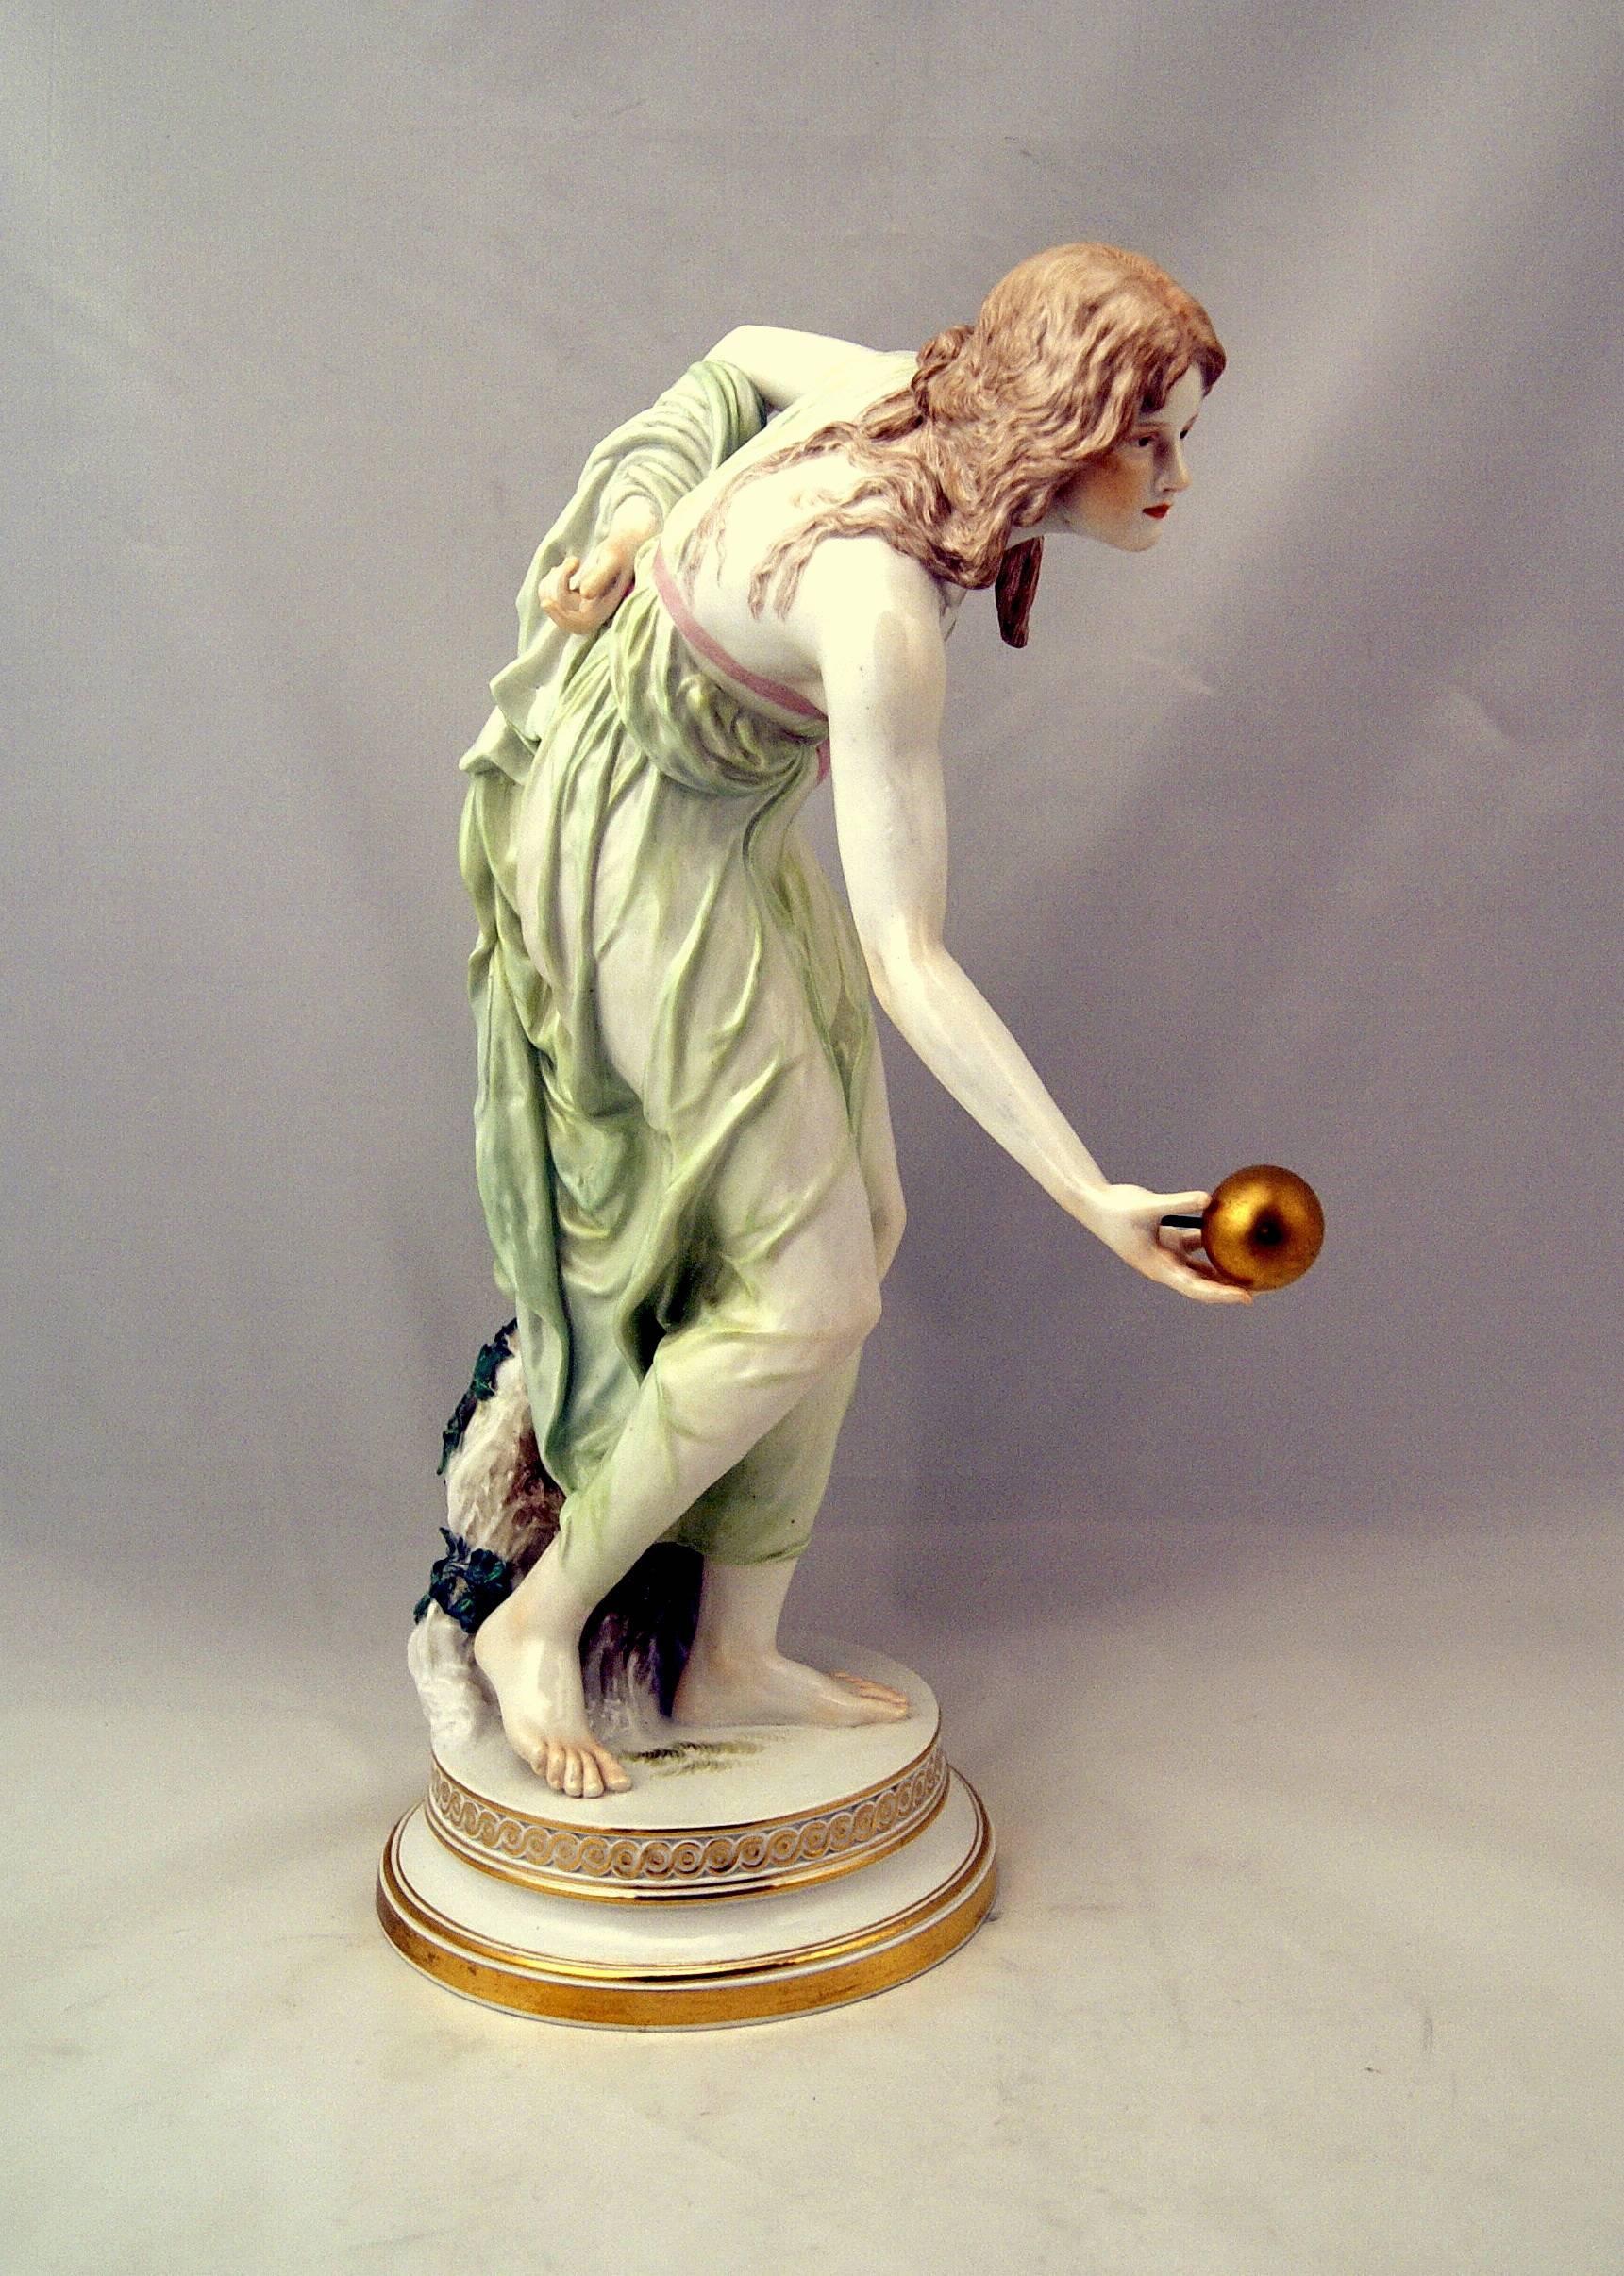 MEISSEN LOVELY GIRL PLAYING BOWLS 
GORGEOUS ART NOUVEAU PORCELAIN FIGURINE  /  CREATED BY WALTER SCHOTT IN 1898
QUITE EARLY MANUFACTURING   (MADE CIRCA 1900)  !
FIRST QUALITY

MEISSEN BLUE SWORD MARK WITH POMMELS ON HILTS  (underglazed)
MODEL